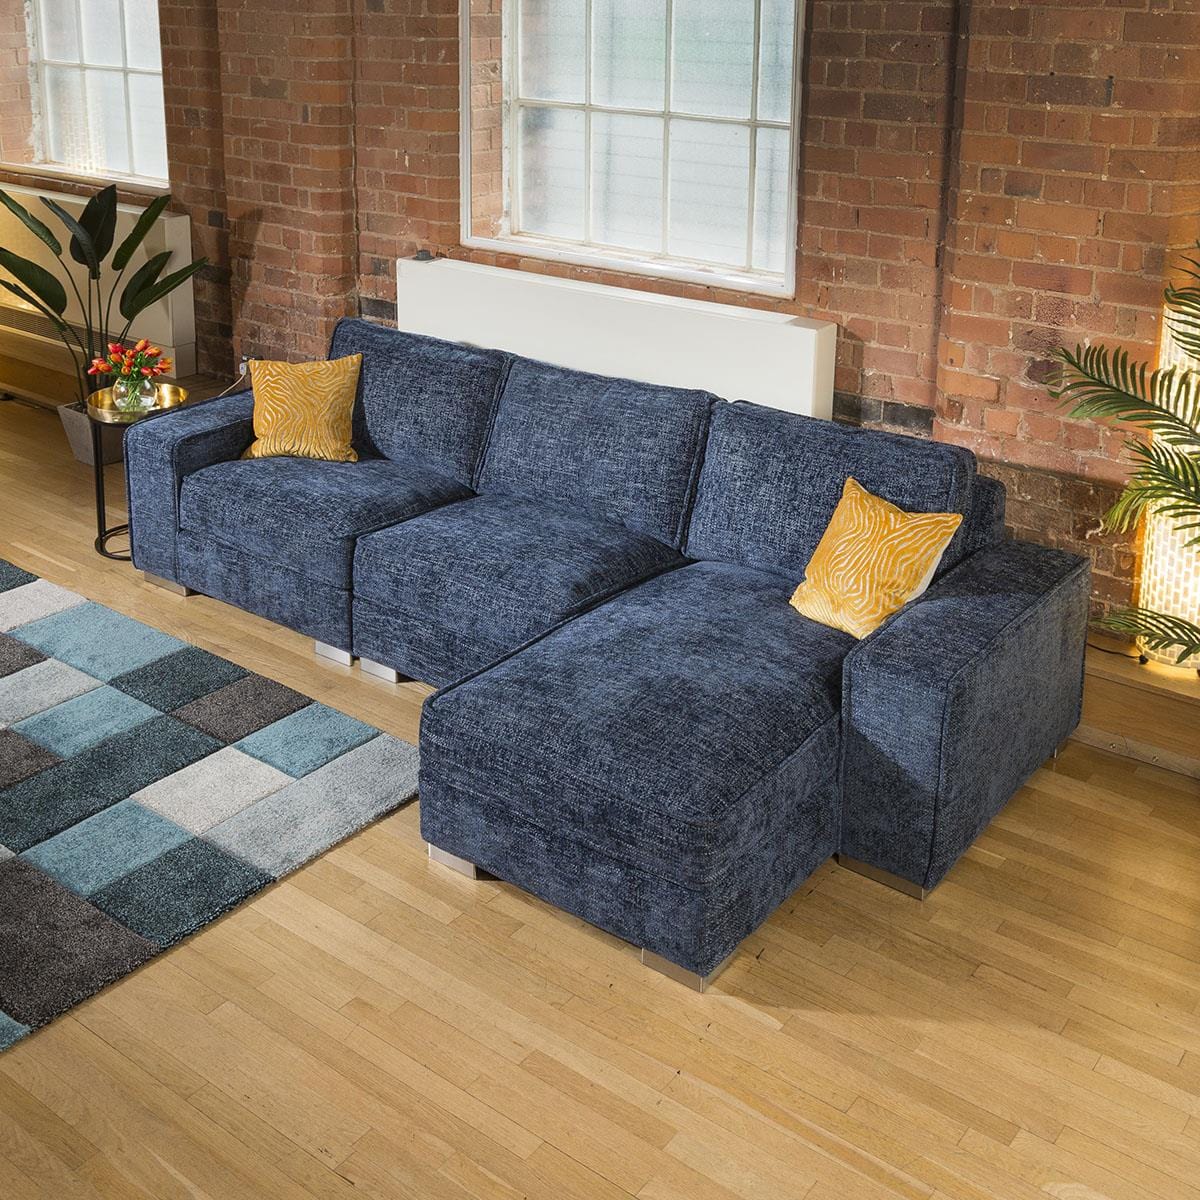 Quatropi Luxury Large Modern Comfy 4 Seater & Chaise Many Colours & Fabrics 2R